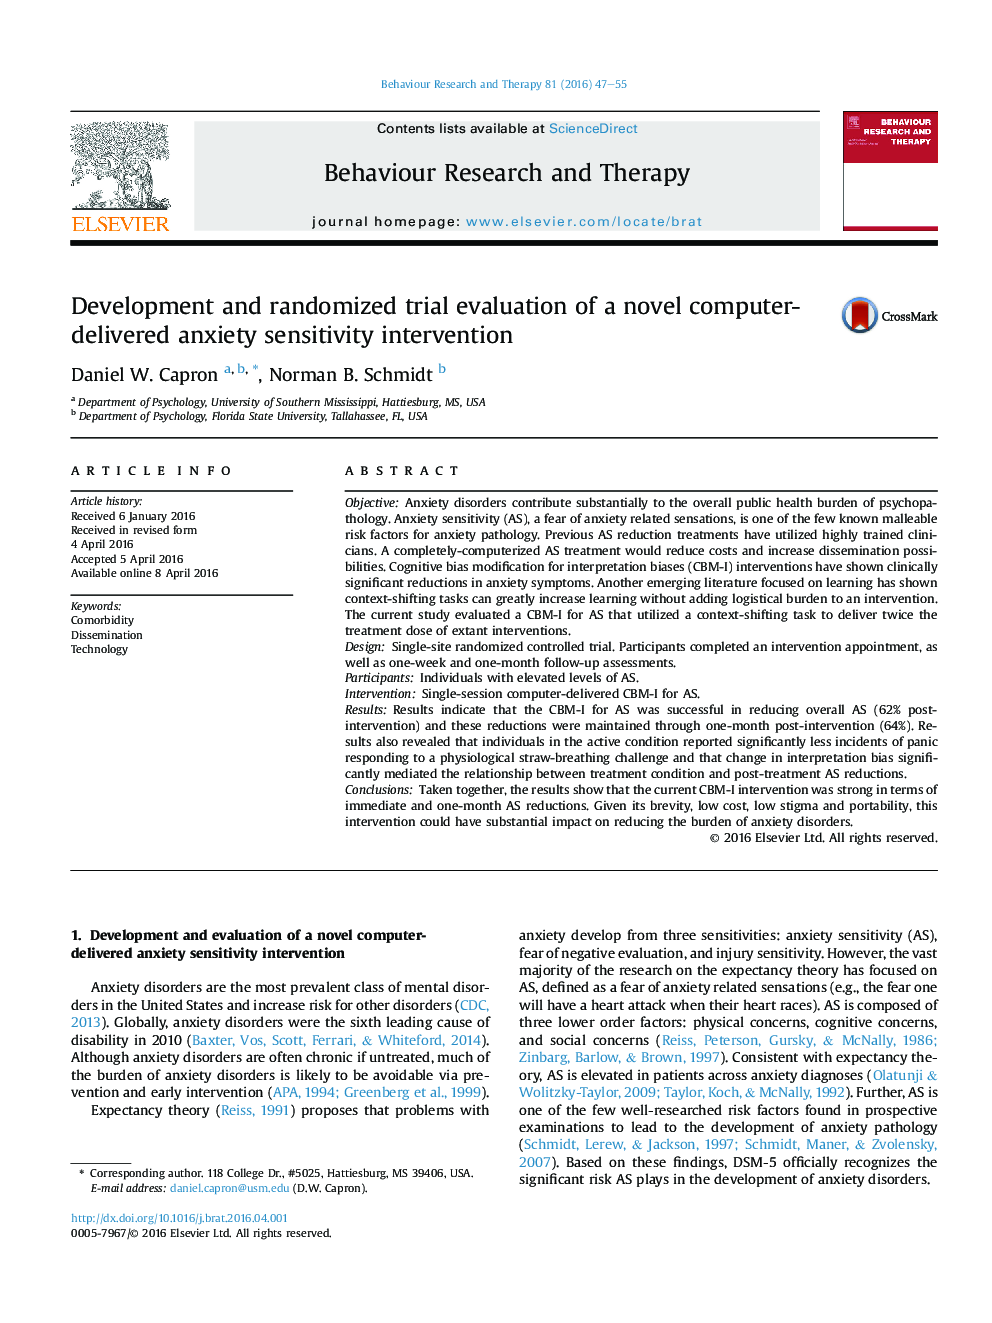 Development and randomized trial evaluation of a novel computer-delivered anxiety sensitivity intervention